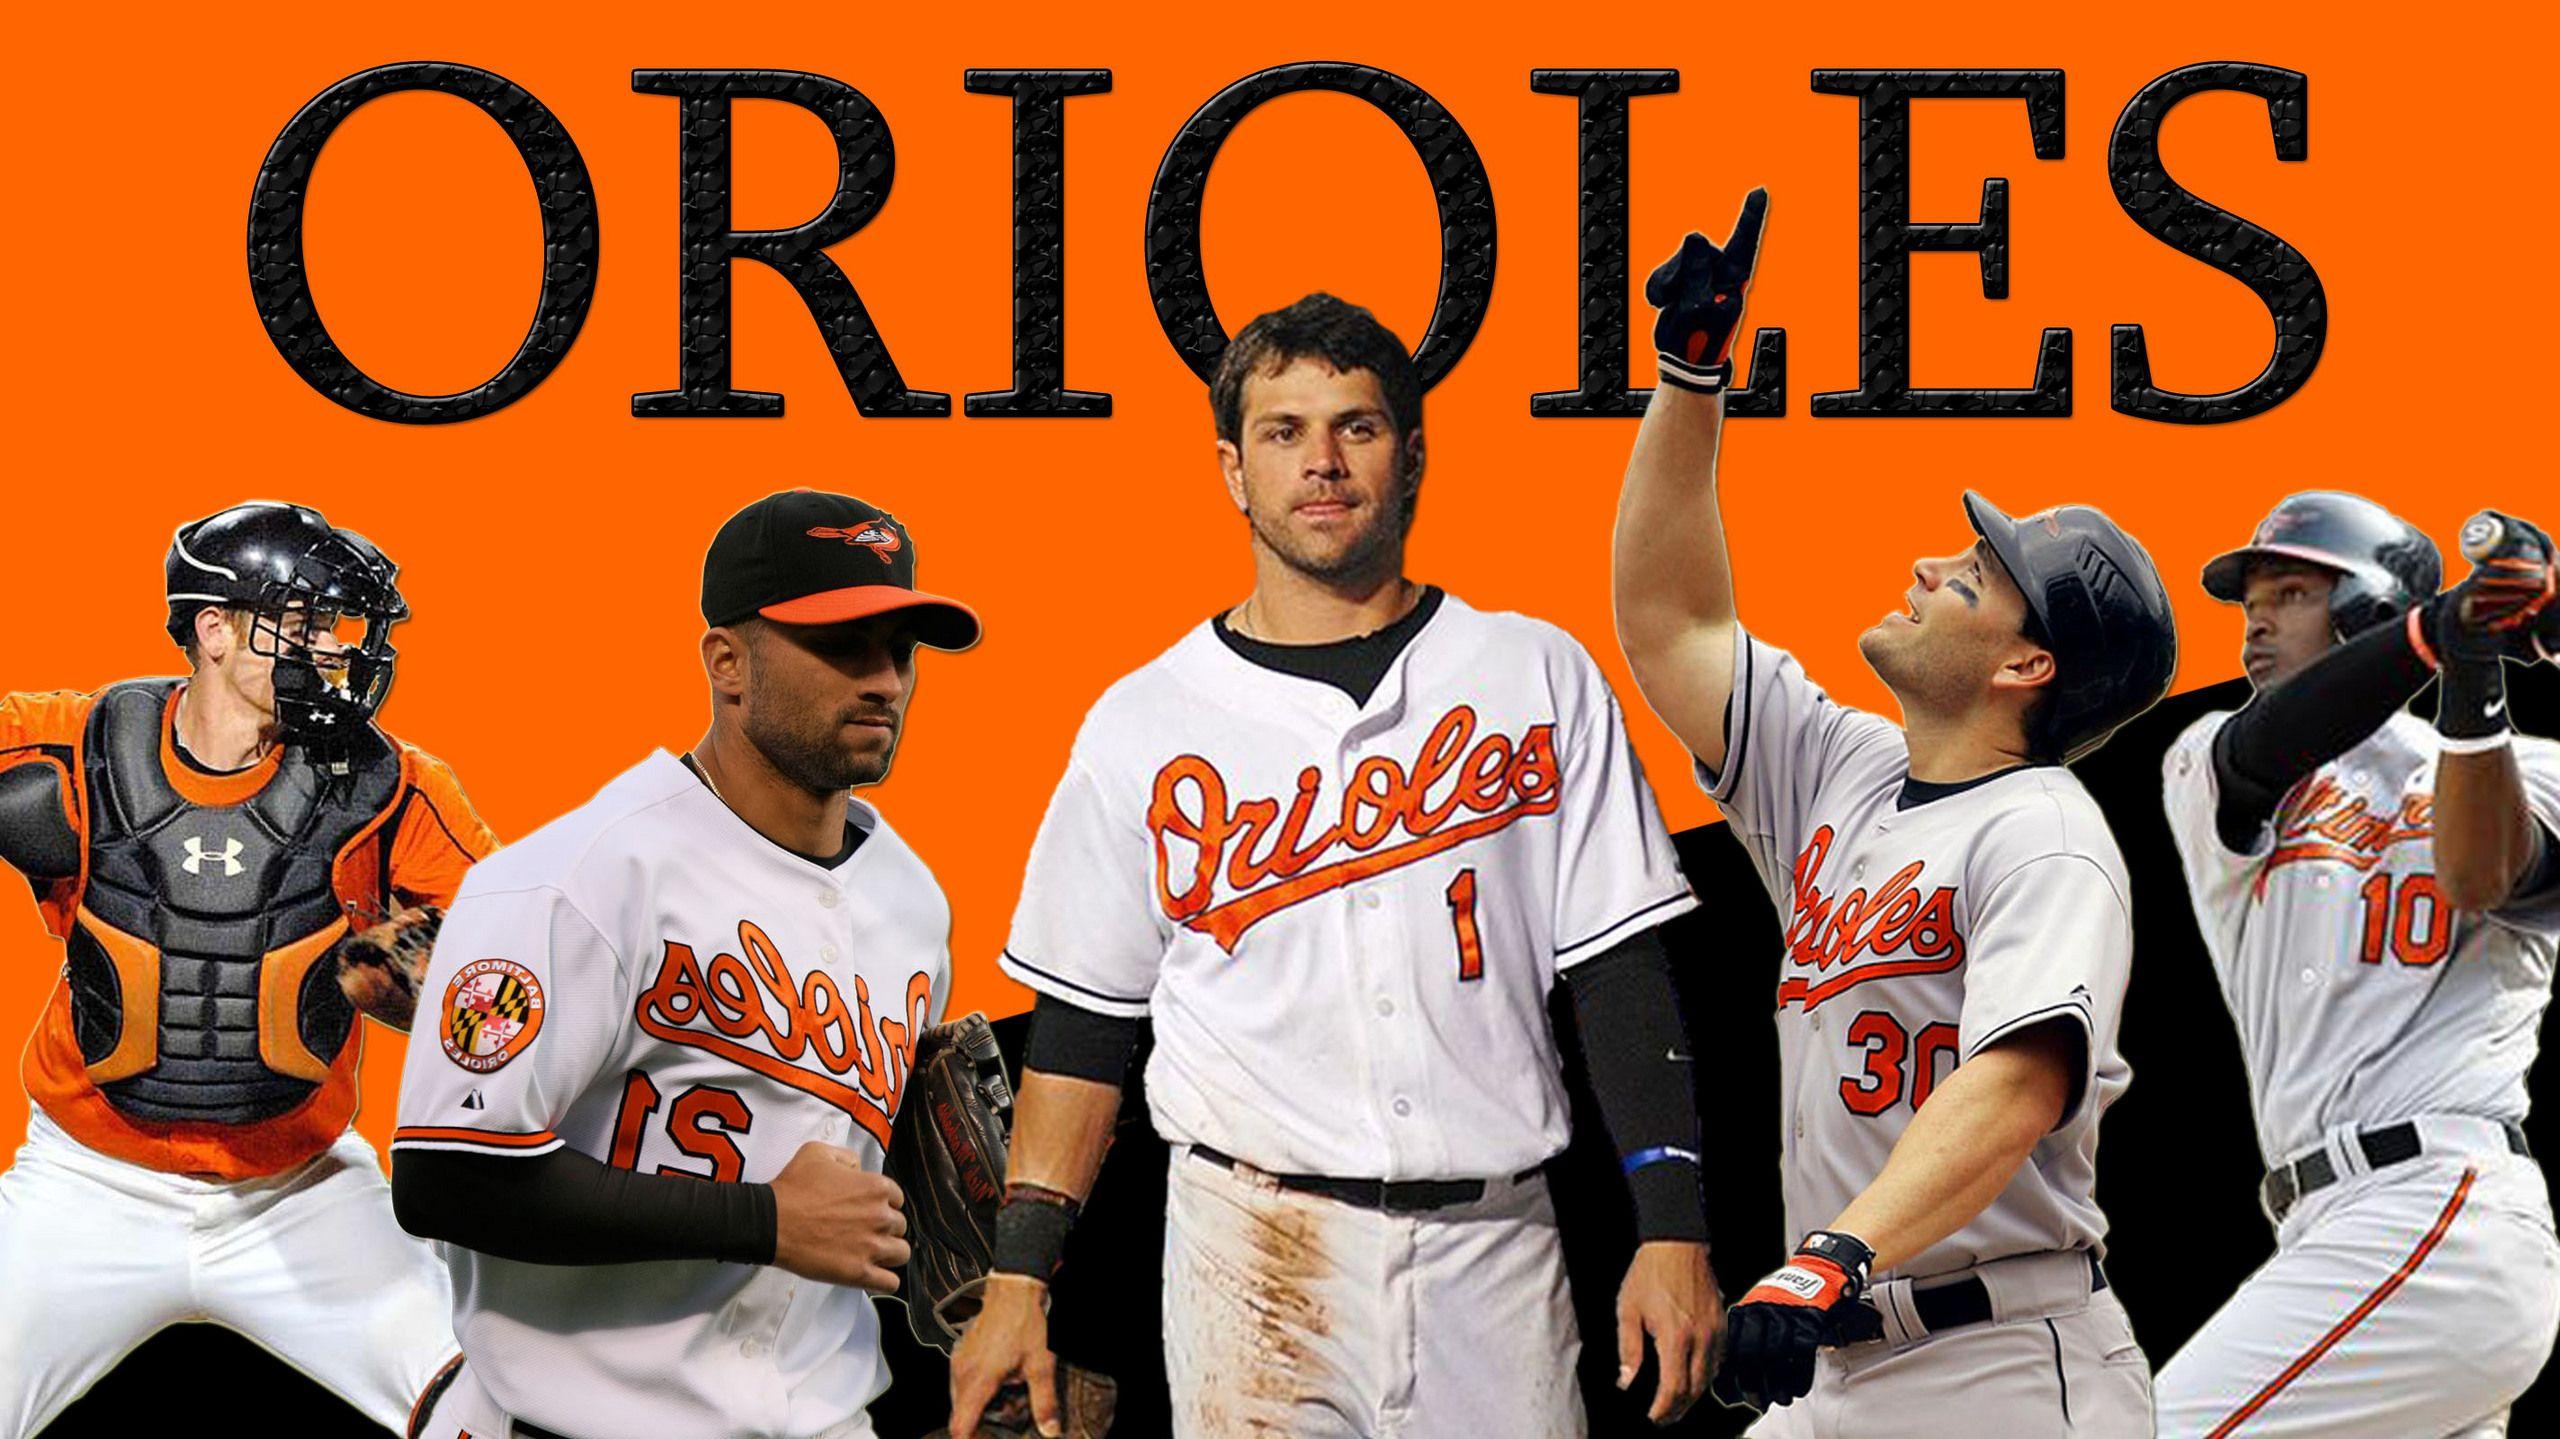 Baltimore Orioles image orioles HD wallpaper and background